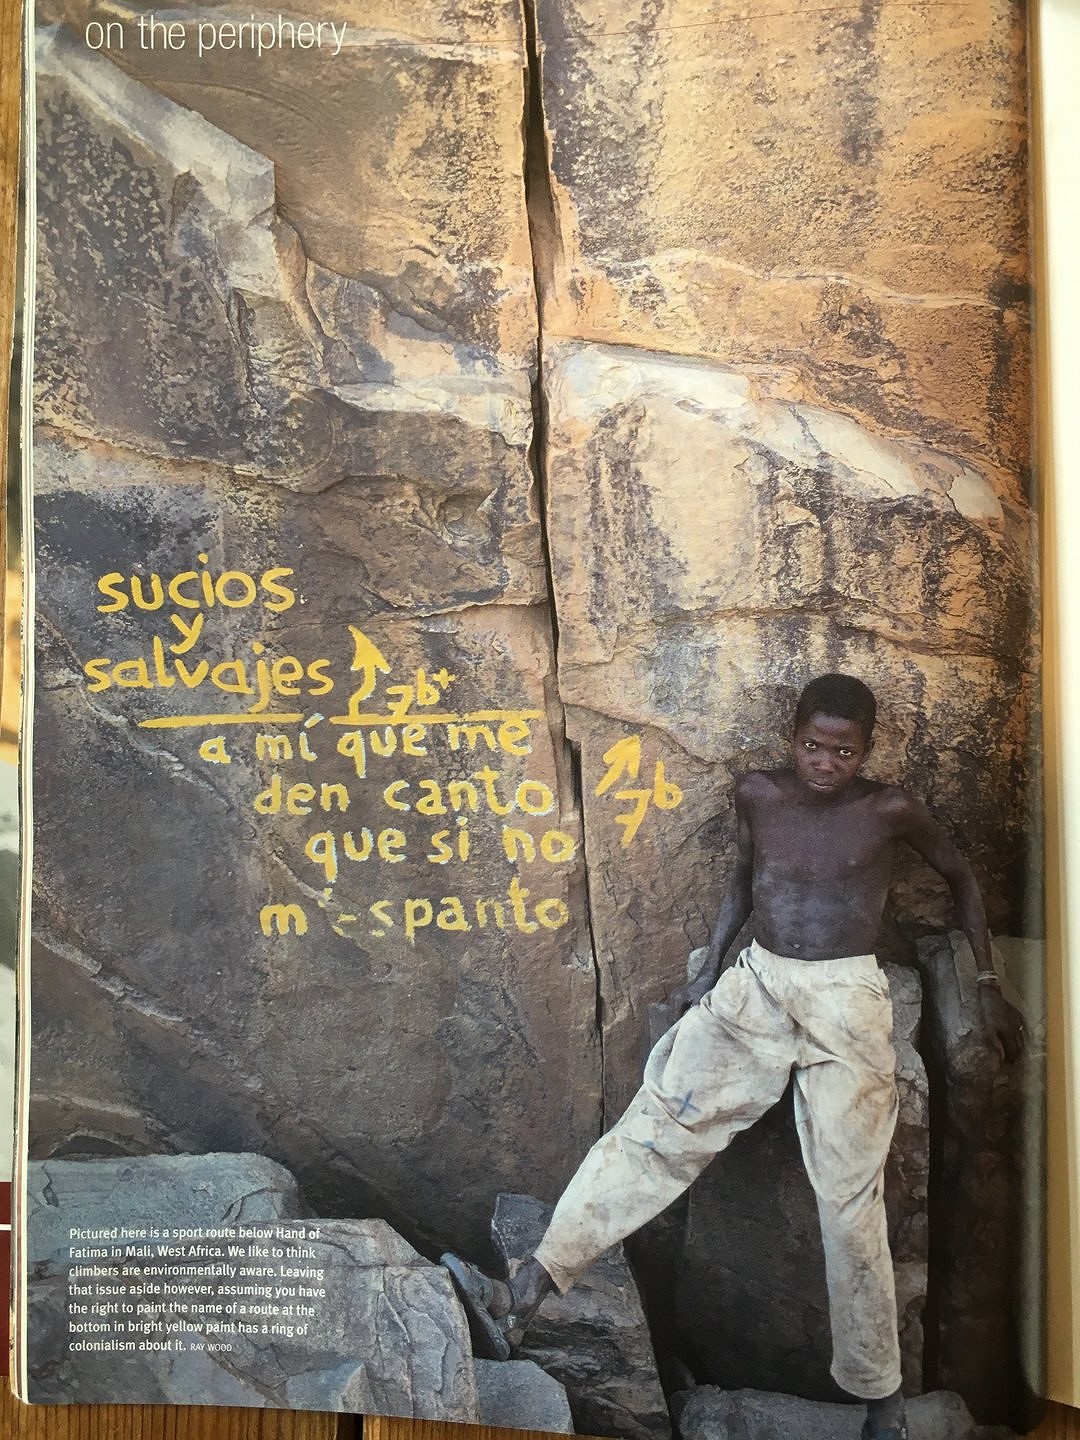 'Dirty men and savages 7b+', the Spanish reads. 'Give me jugs, so that I'm not afraid. 7b' On The Edge, issue 132, Nov. 2003  © Ray Wood